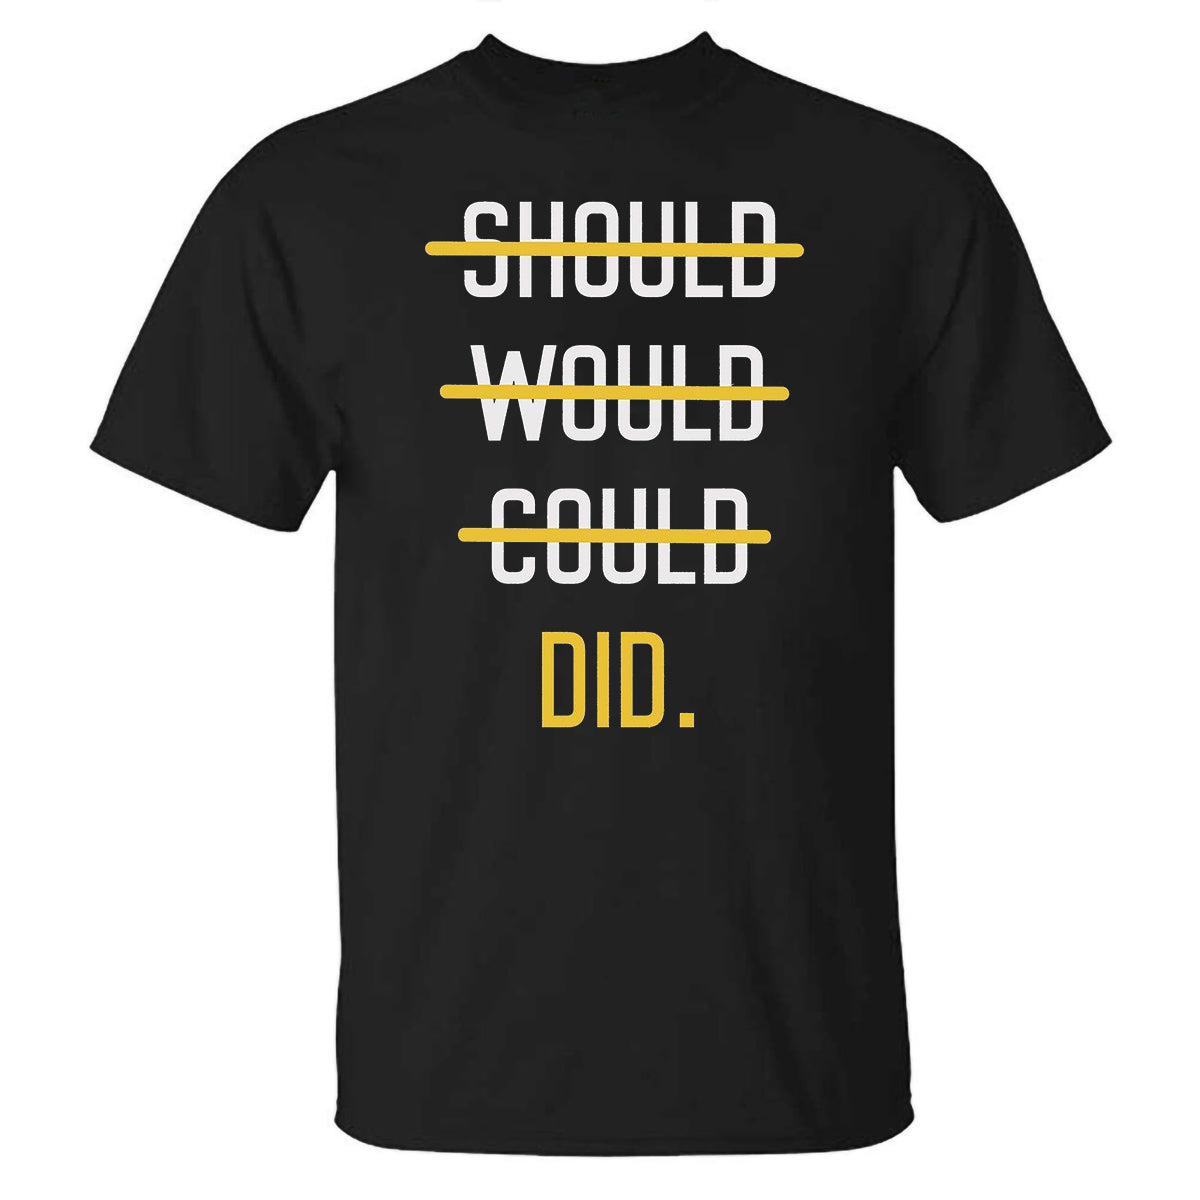 Should Would Could Did Printed T-shirt